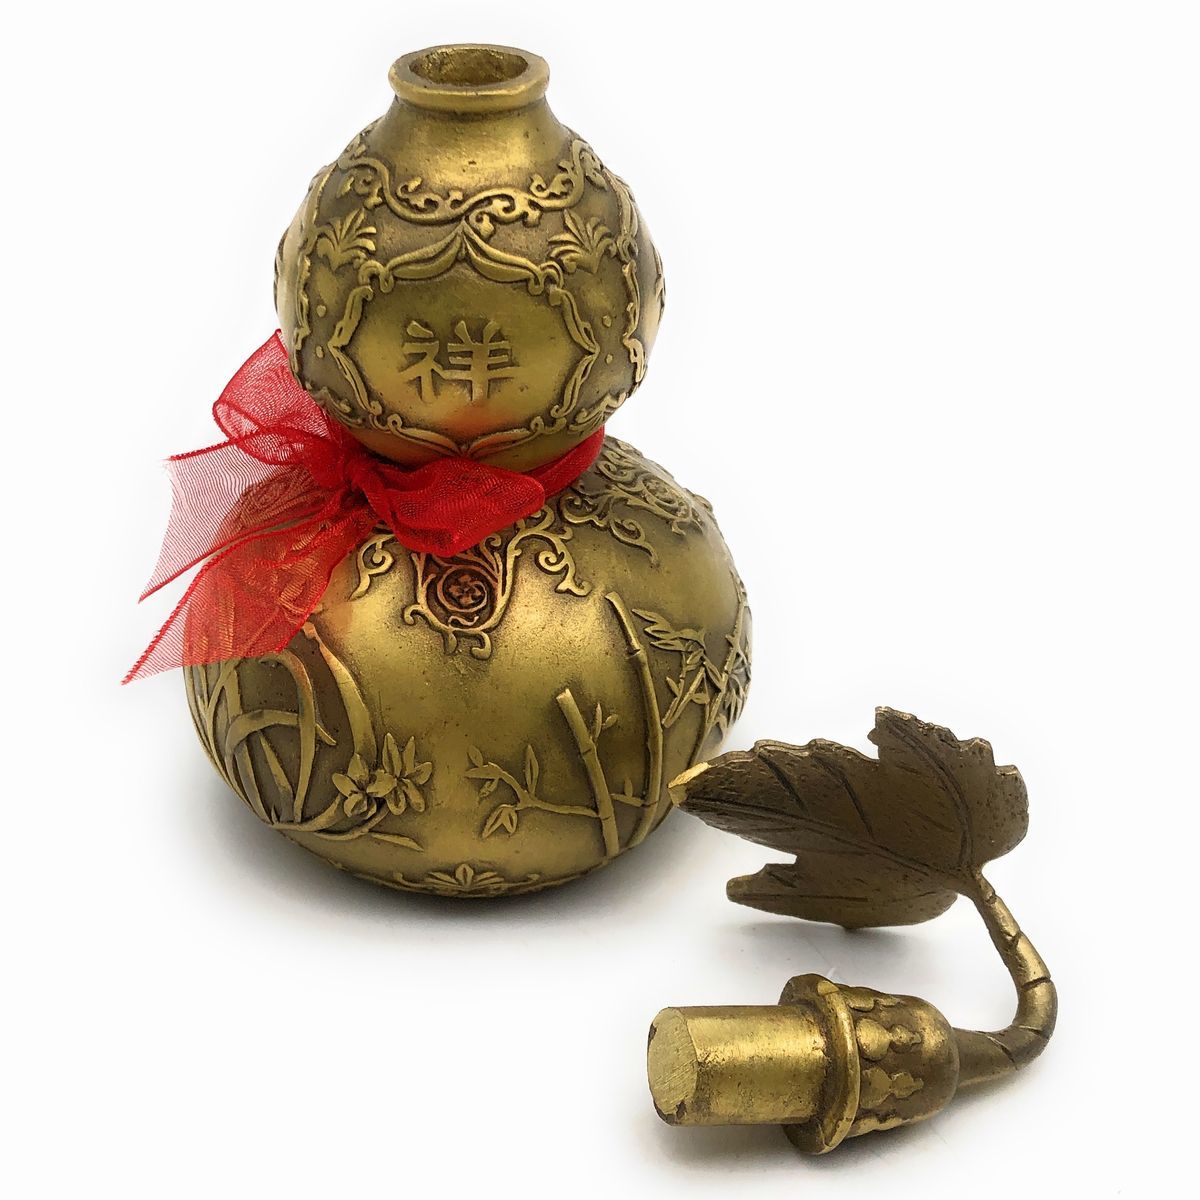  ornament calabash Gold color ... meaning . flower. pattern red ribbon ( small size )